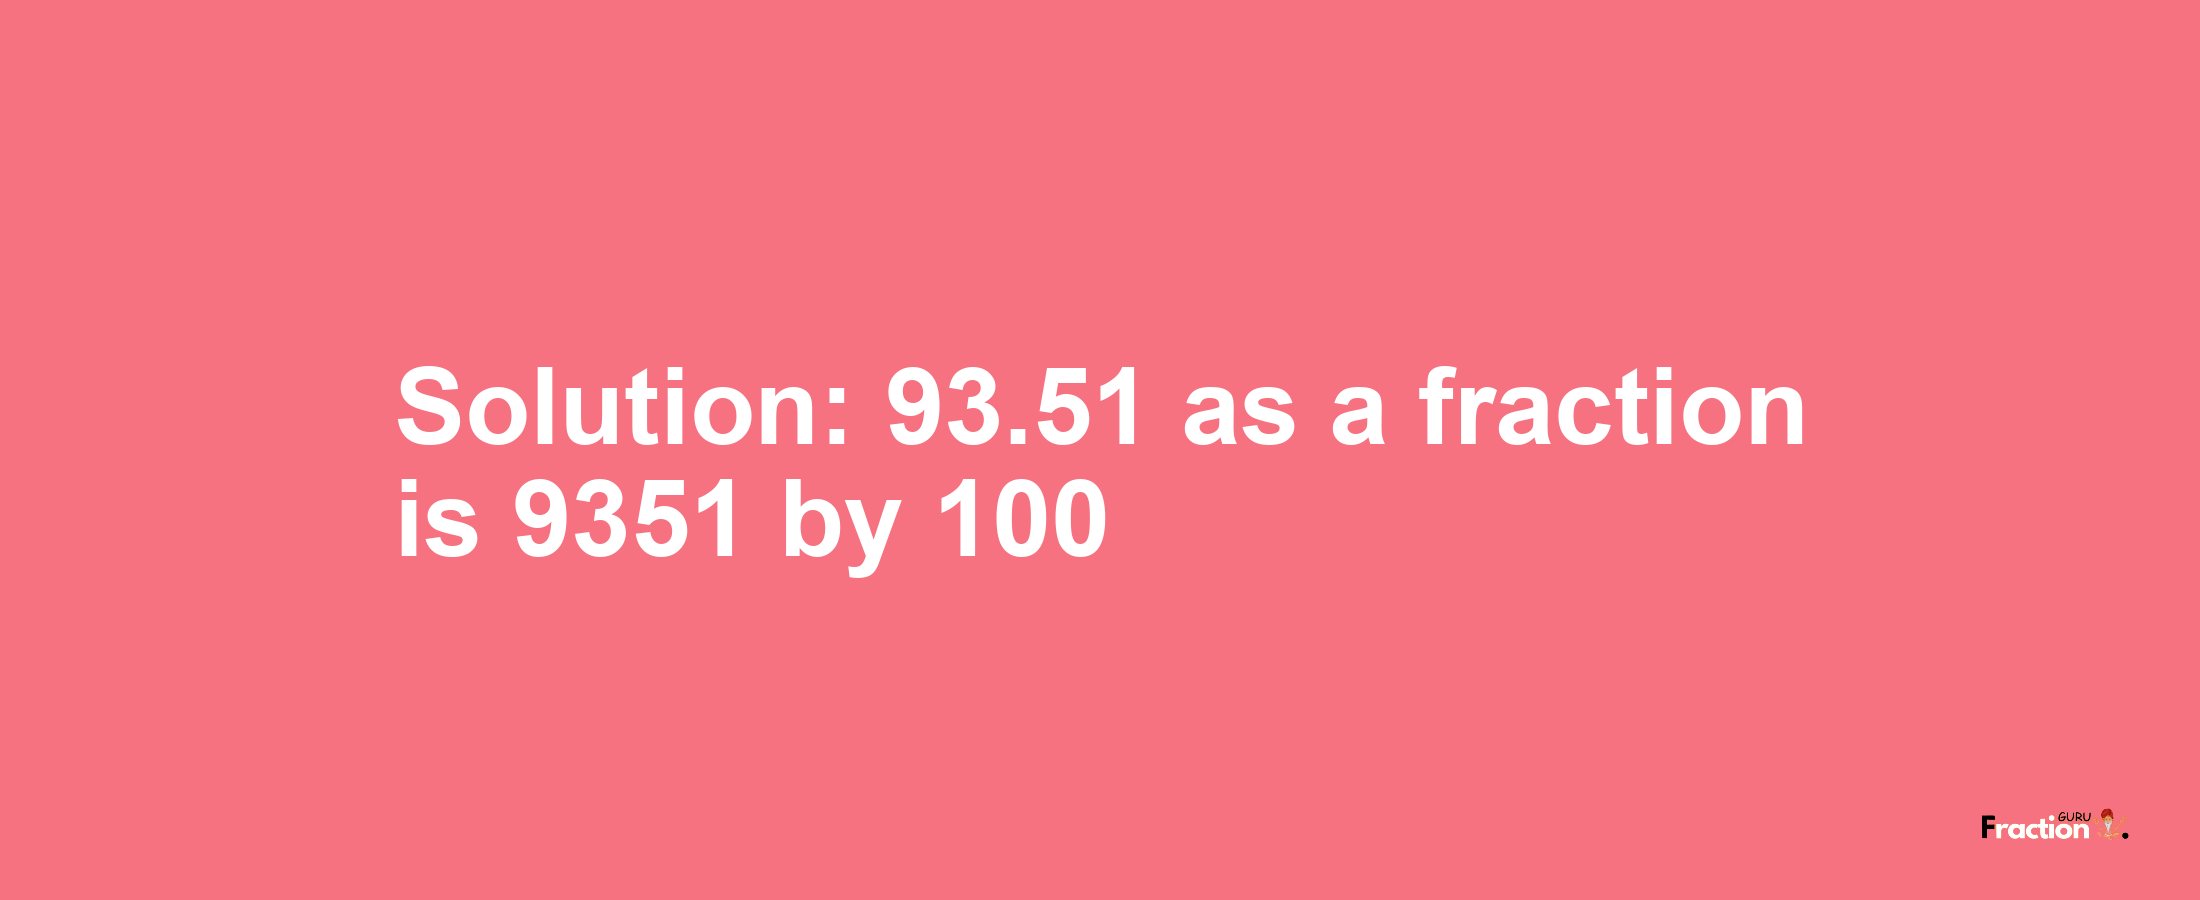 Solution:93.51 as a fraction is 9351/100